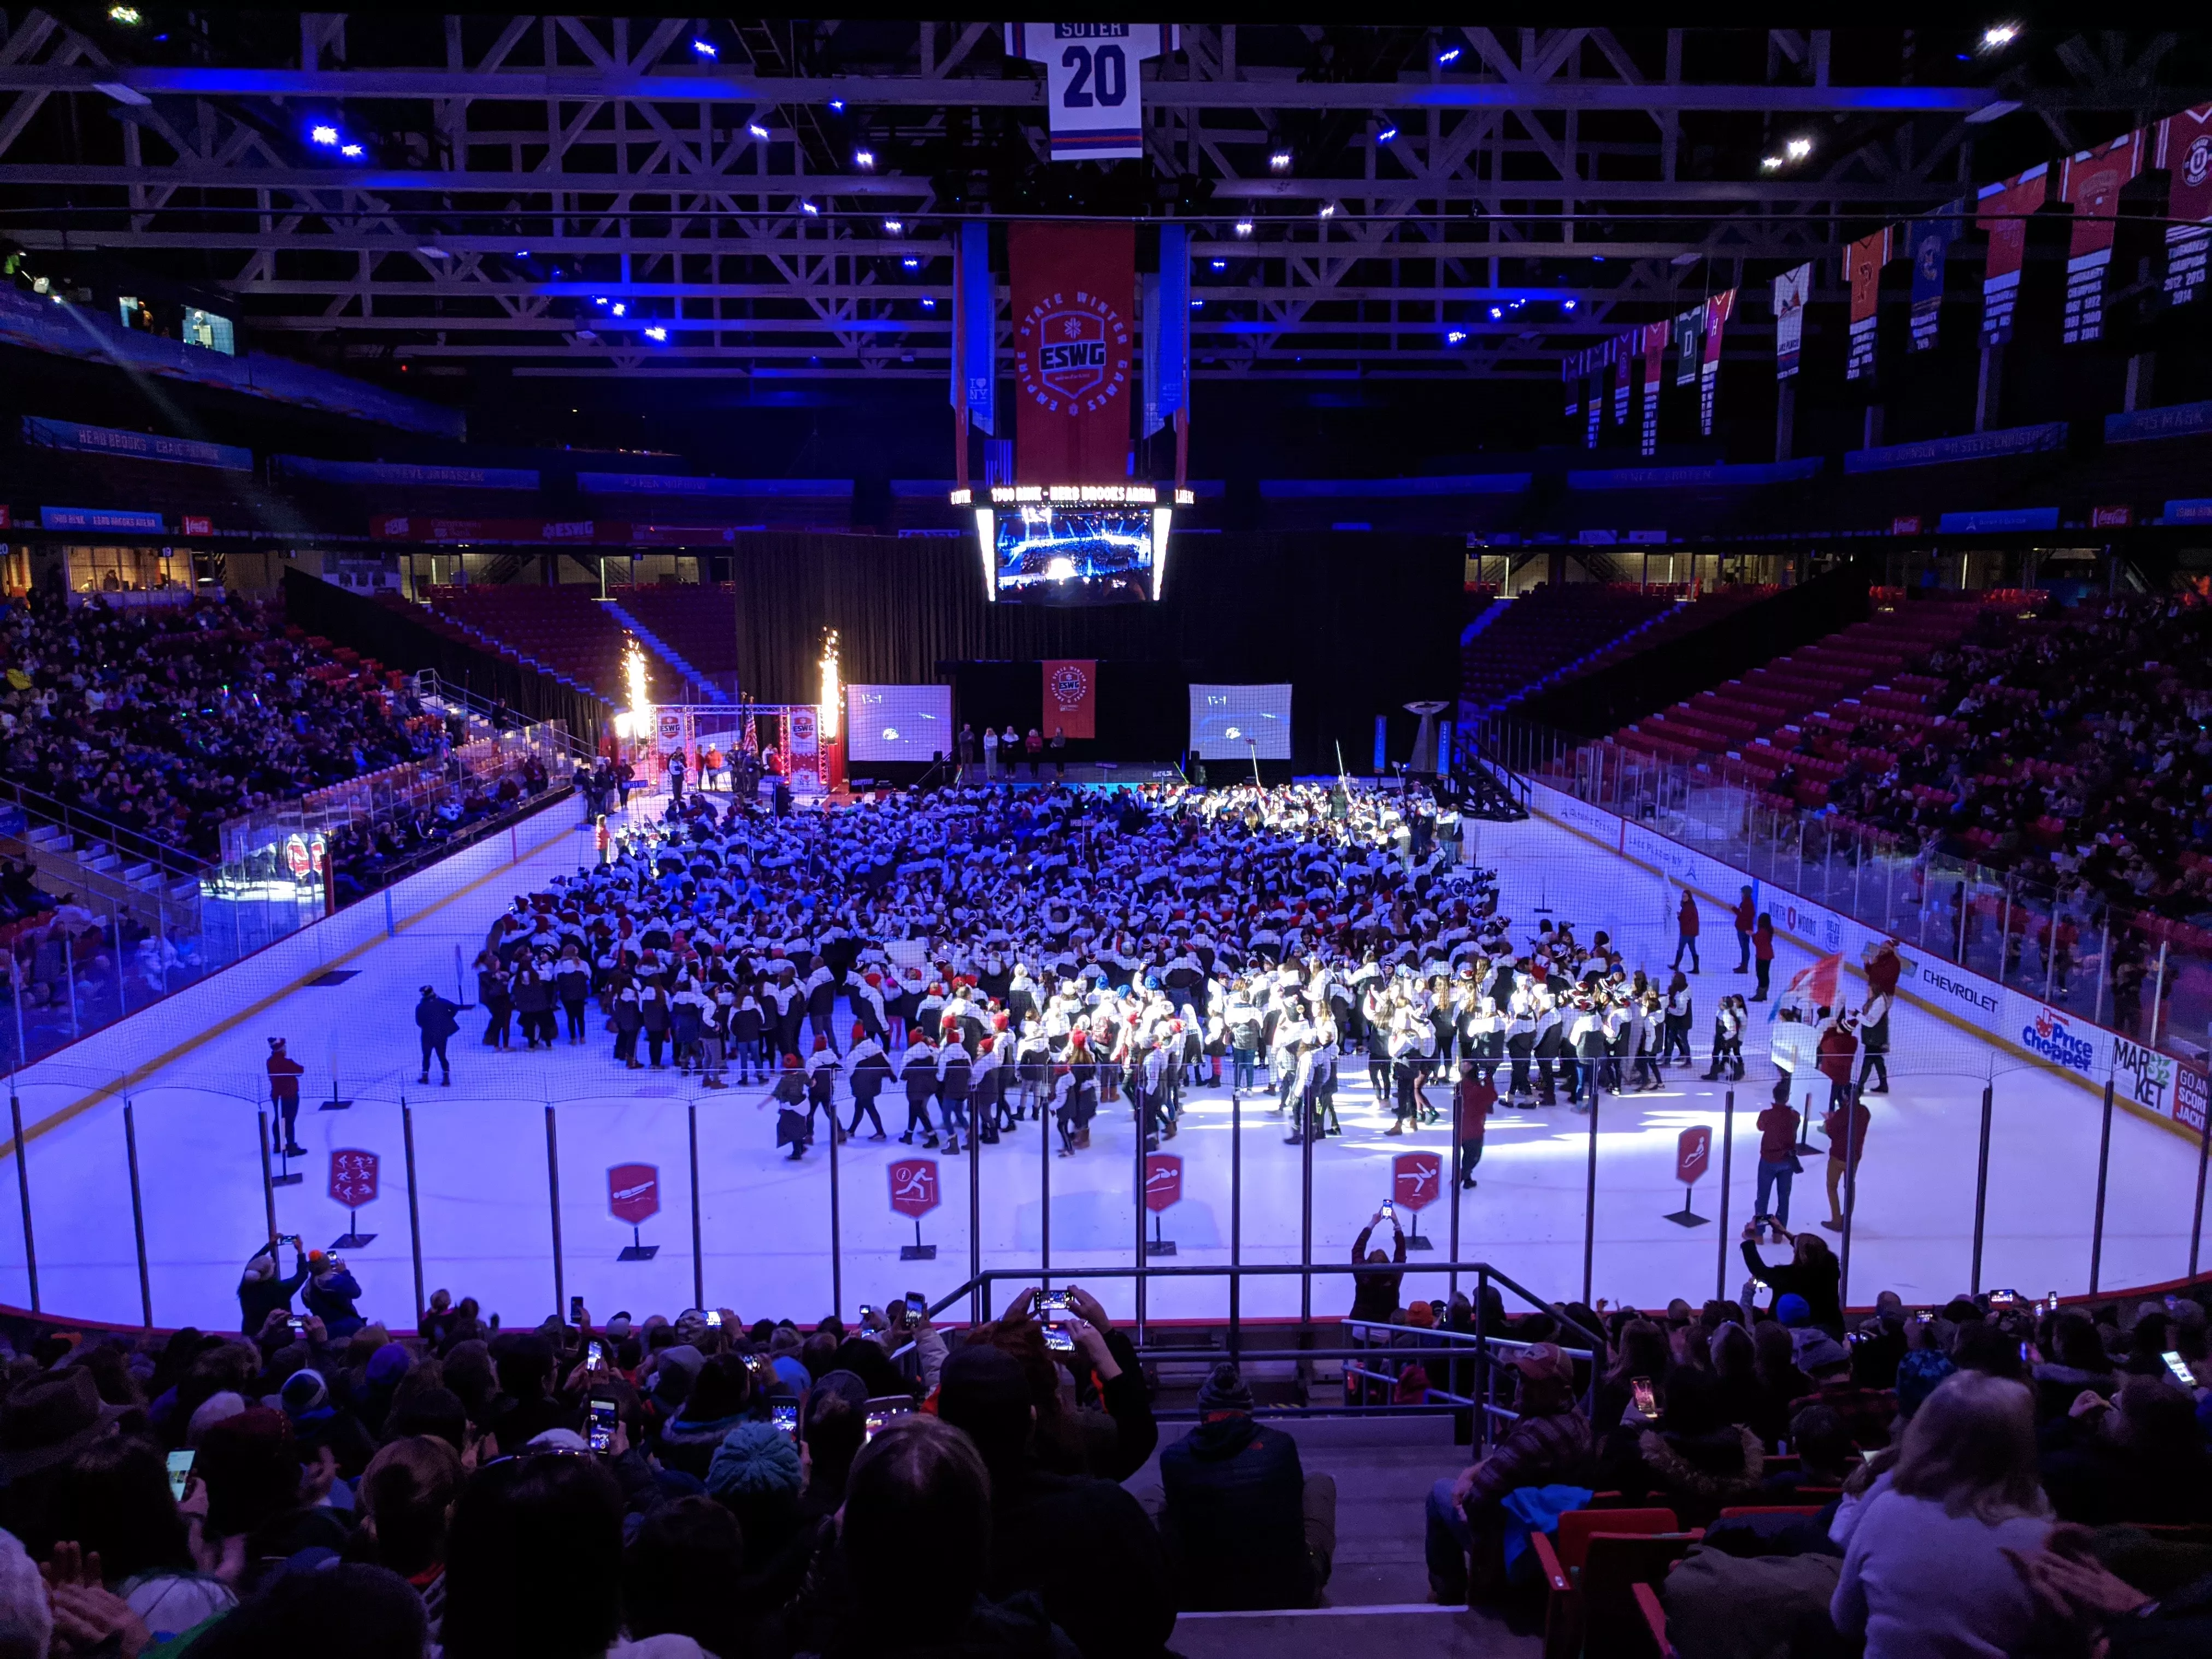 Lake Placid Olympic Center in USA, North America | Hockey - Rated 0.9